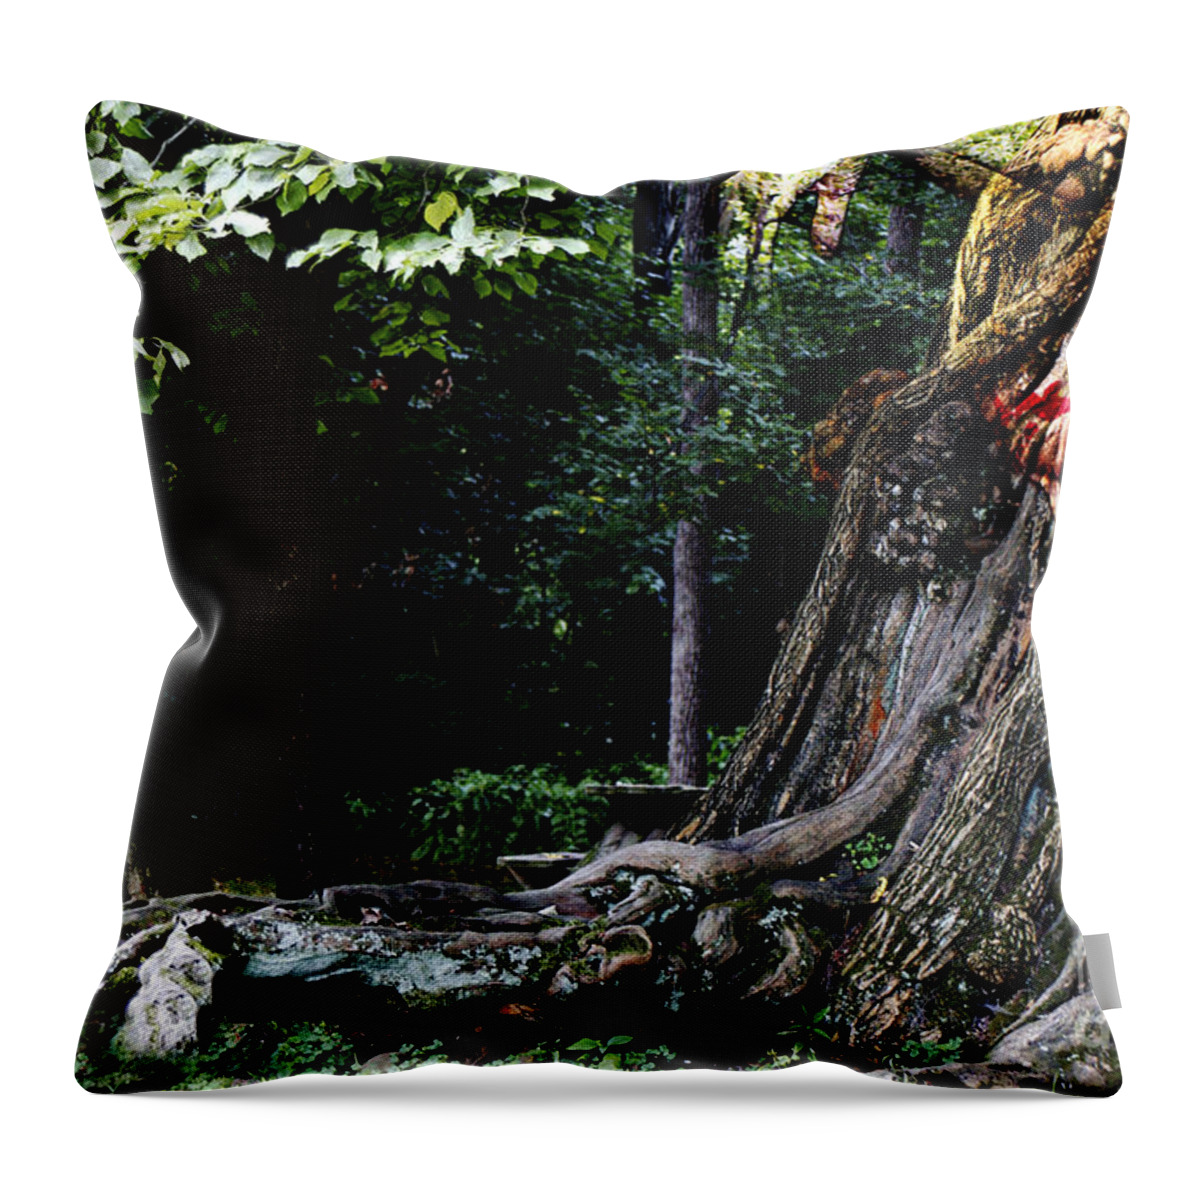 Clay Throw Pillow featuring the photograph Forest Nymph by Clayton Bruster